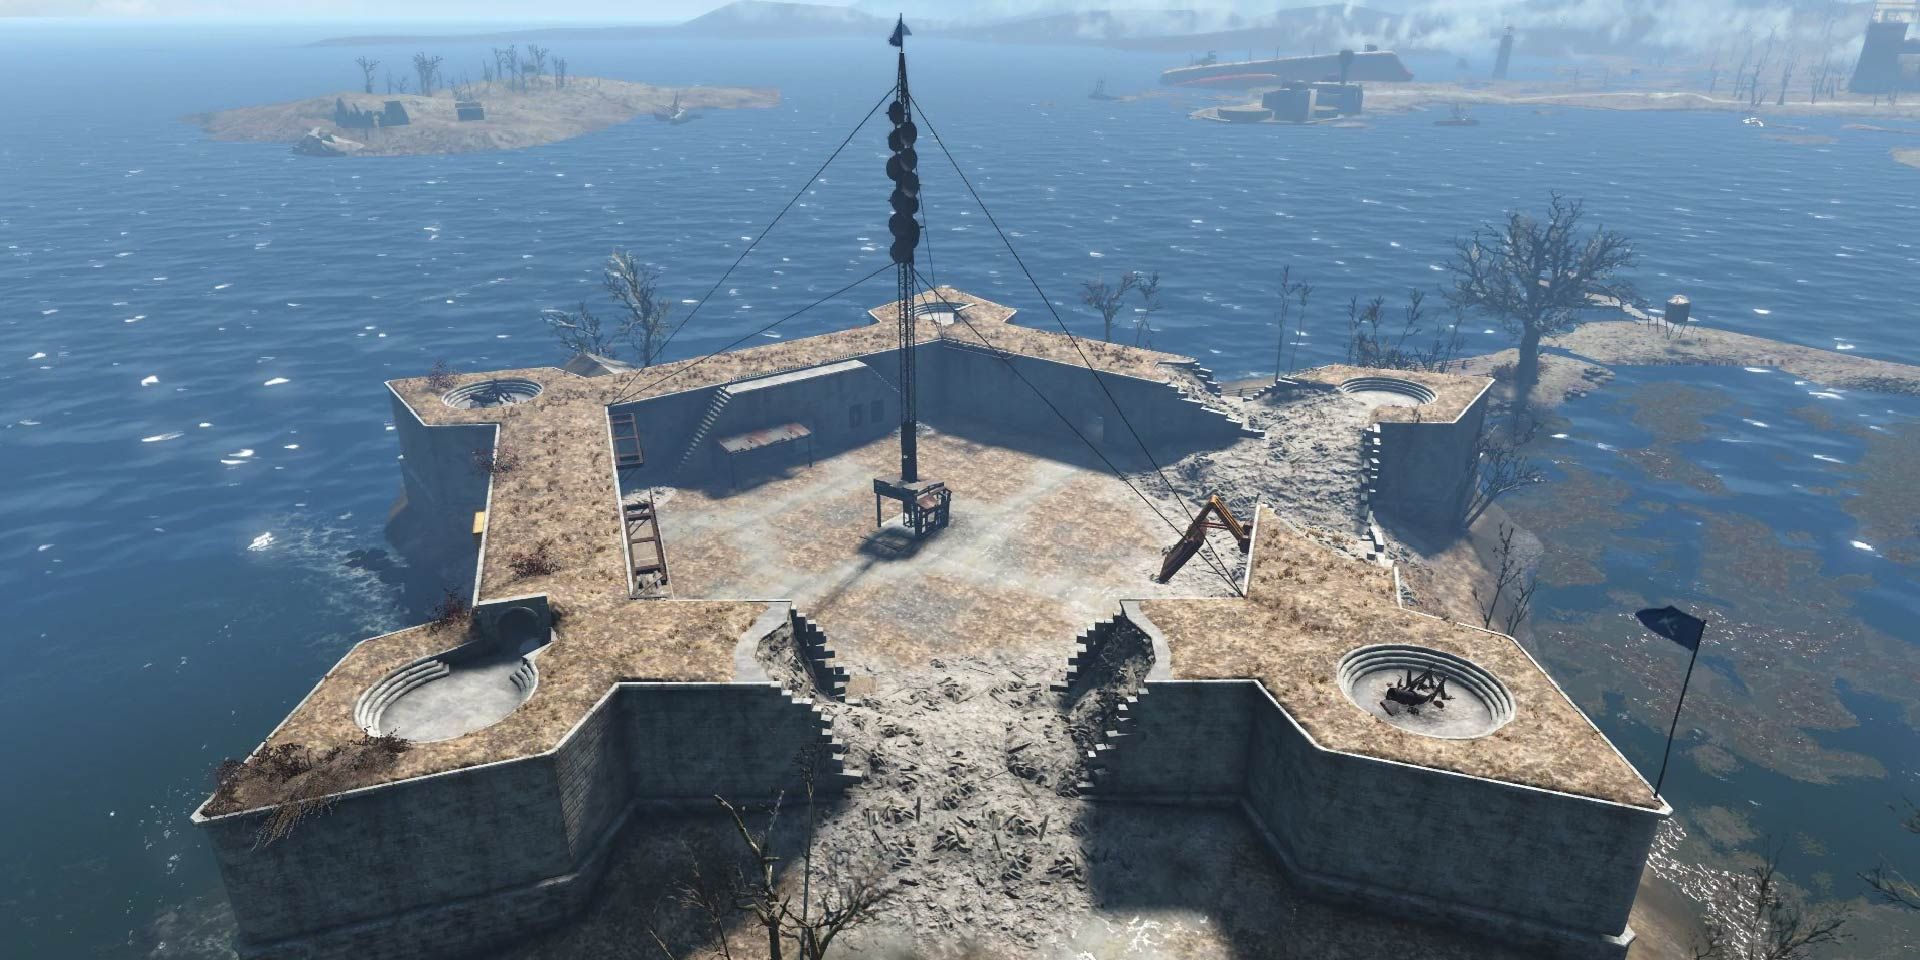 The Castle in Fallout 4; a star-shaped fortress surrounded by water.